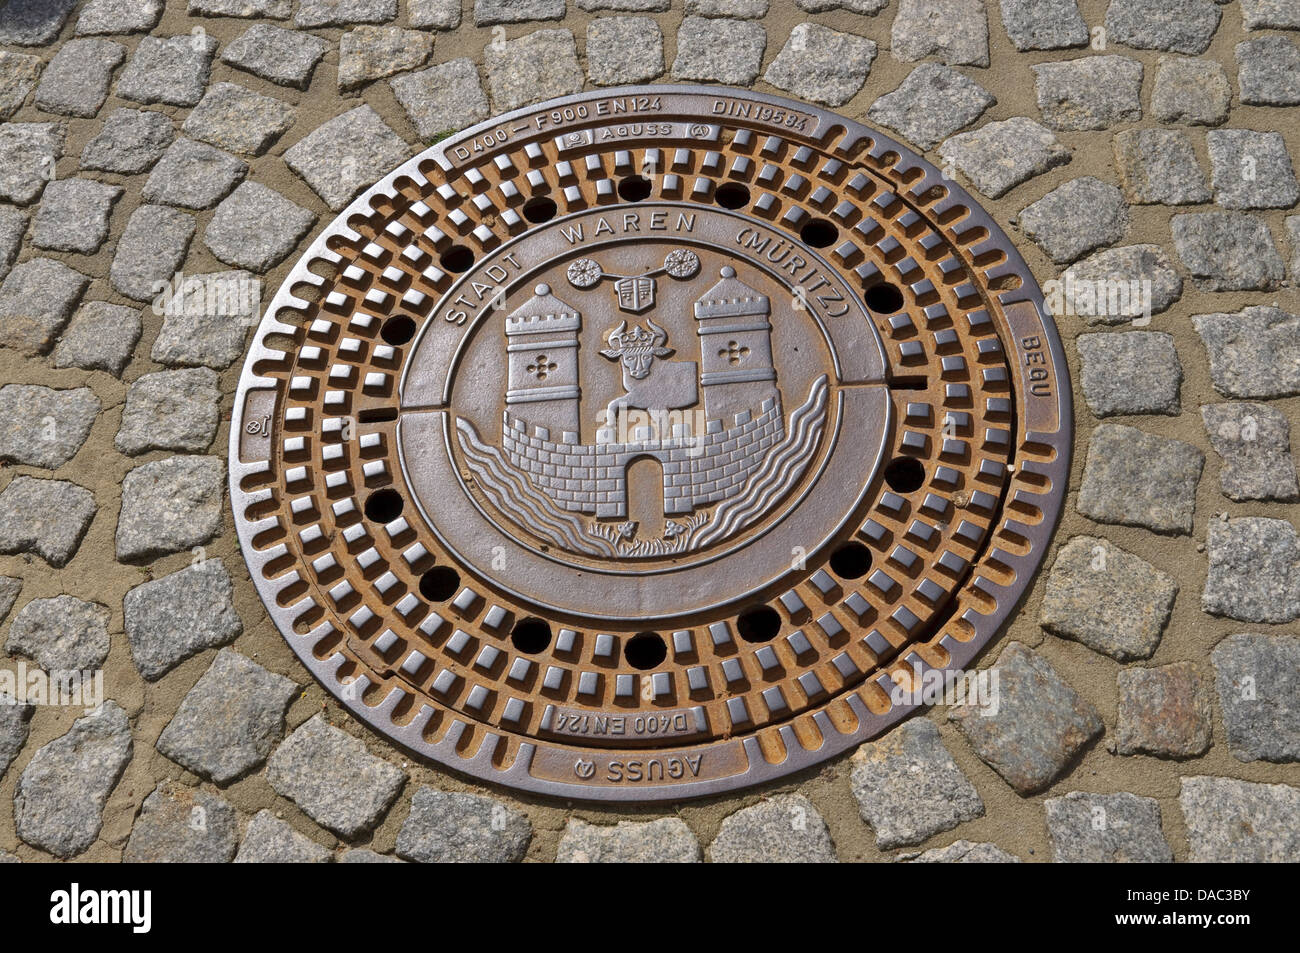 Decorative man hole cover with Waren coat of arms, Germany. Stock Photo